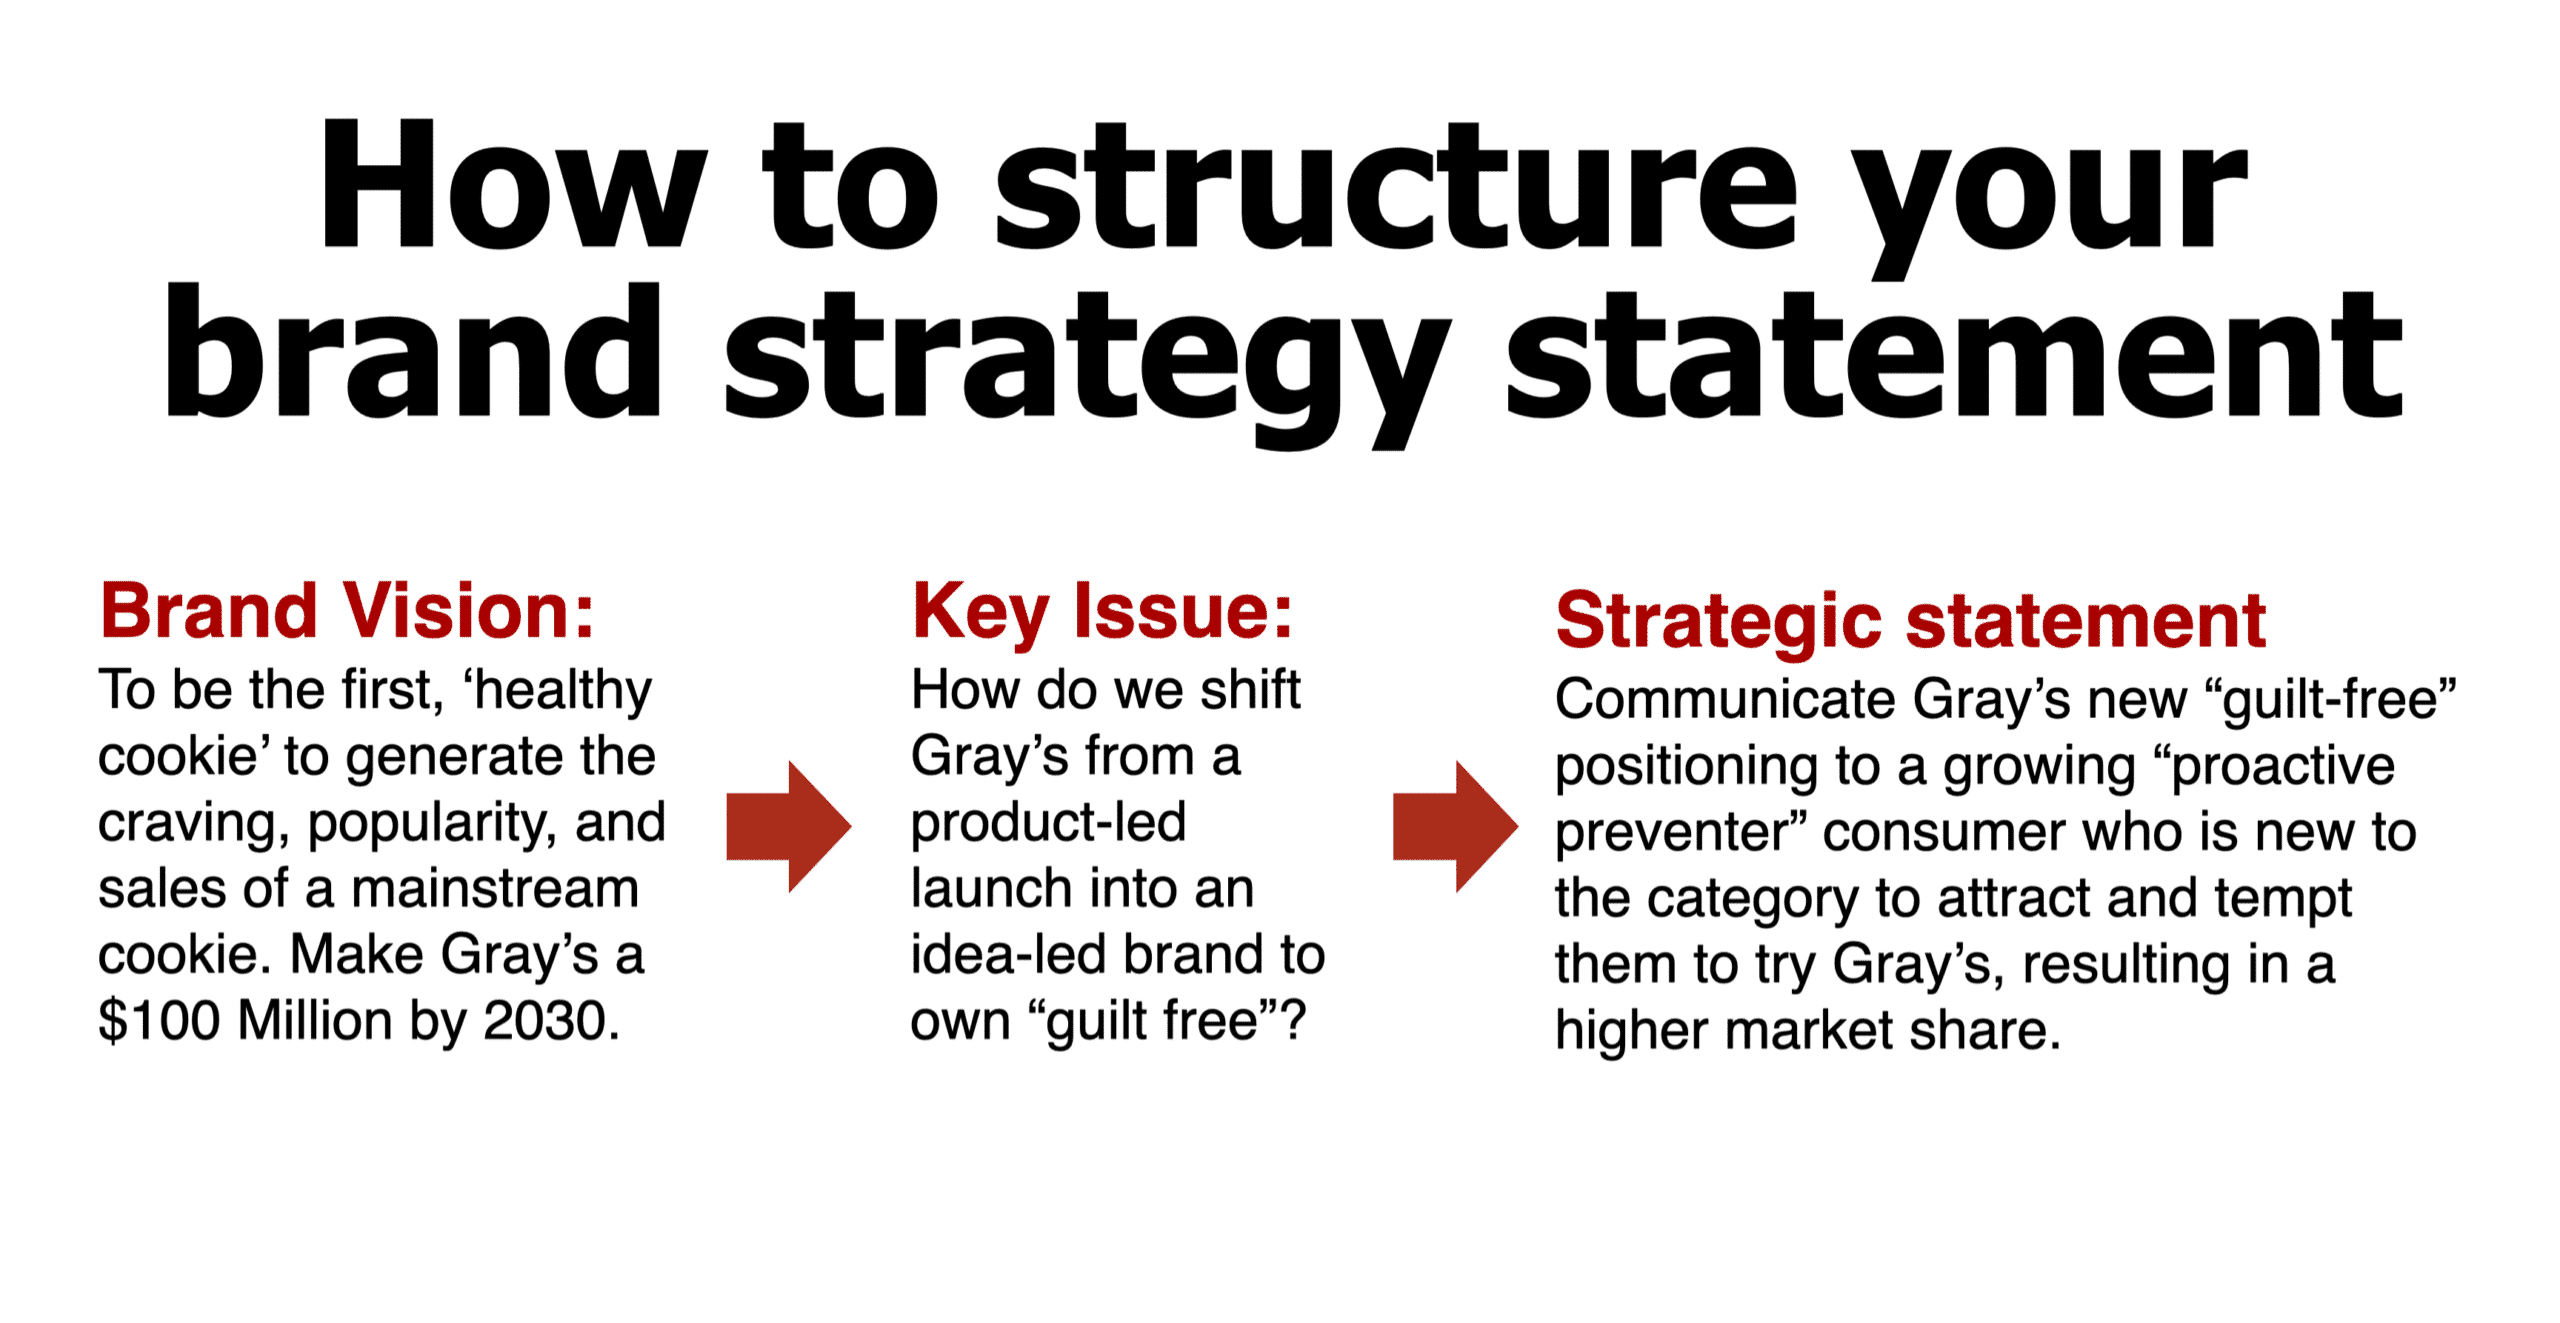 How to structure brand strategy statements in your marketing plan